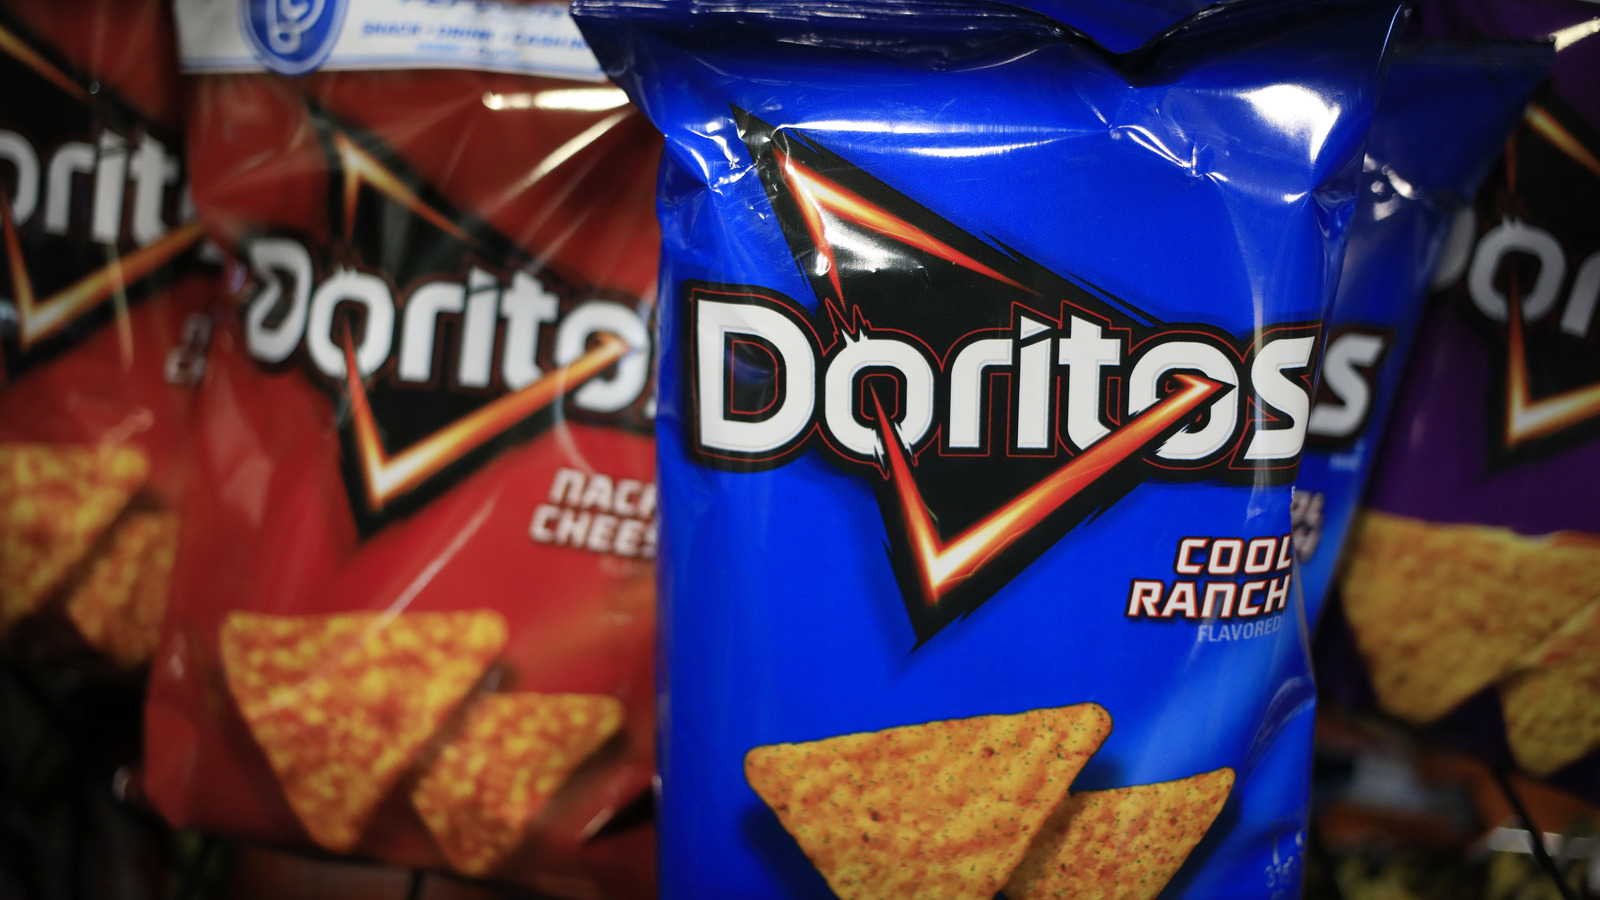 https://www.thedailymeal.com/img/gallery/storing-cool-ranch-doritos-in-the-freezer-is-a-game-changer/l-intro-1675179878.jpg